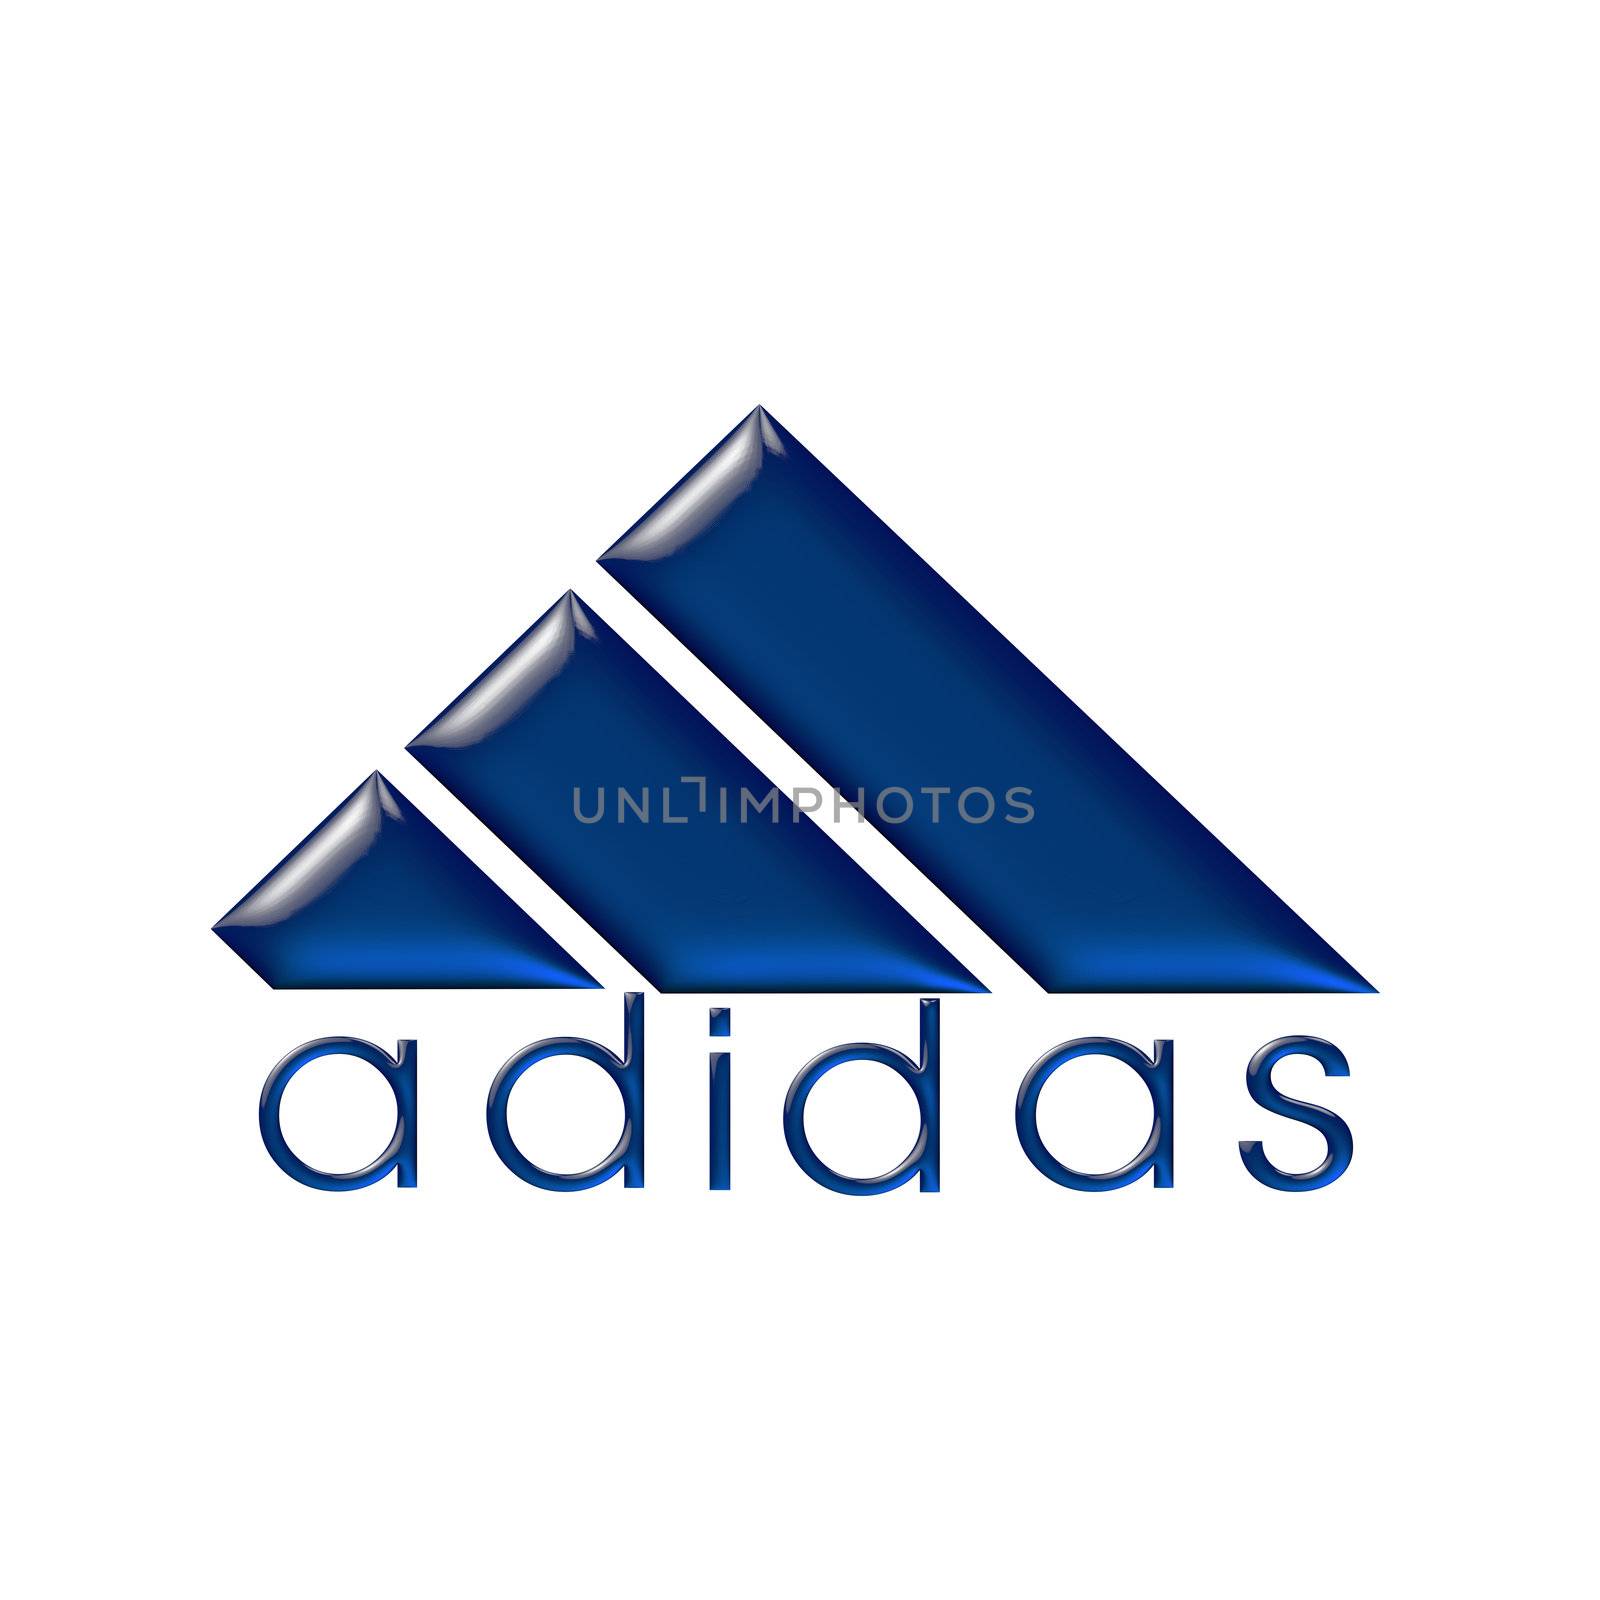 ADIDAS logo on tridimensional glossy blue on a white background